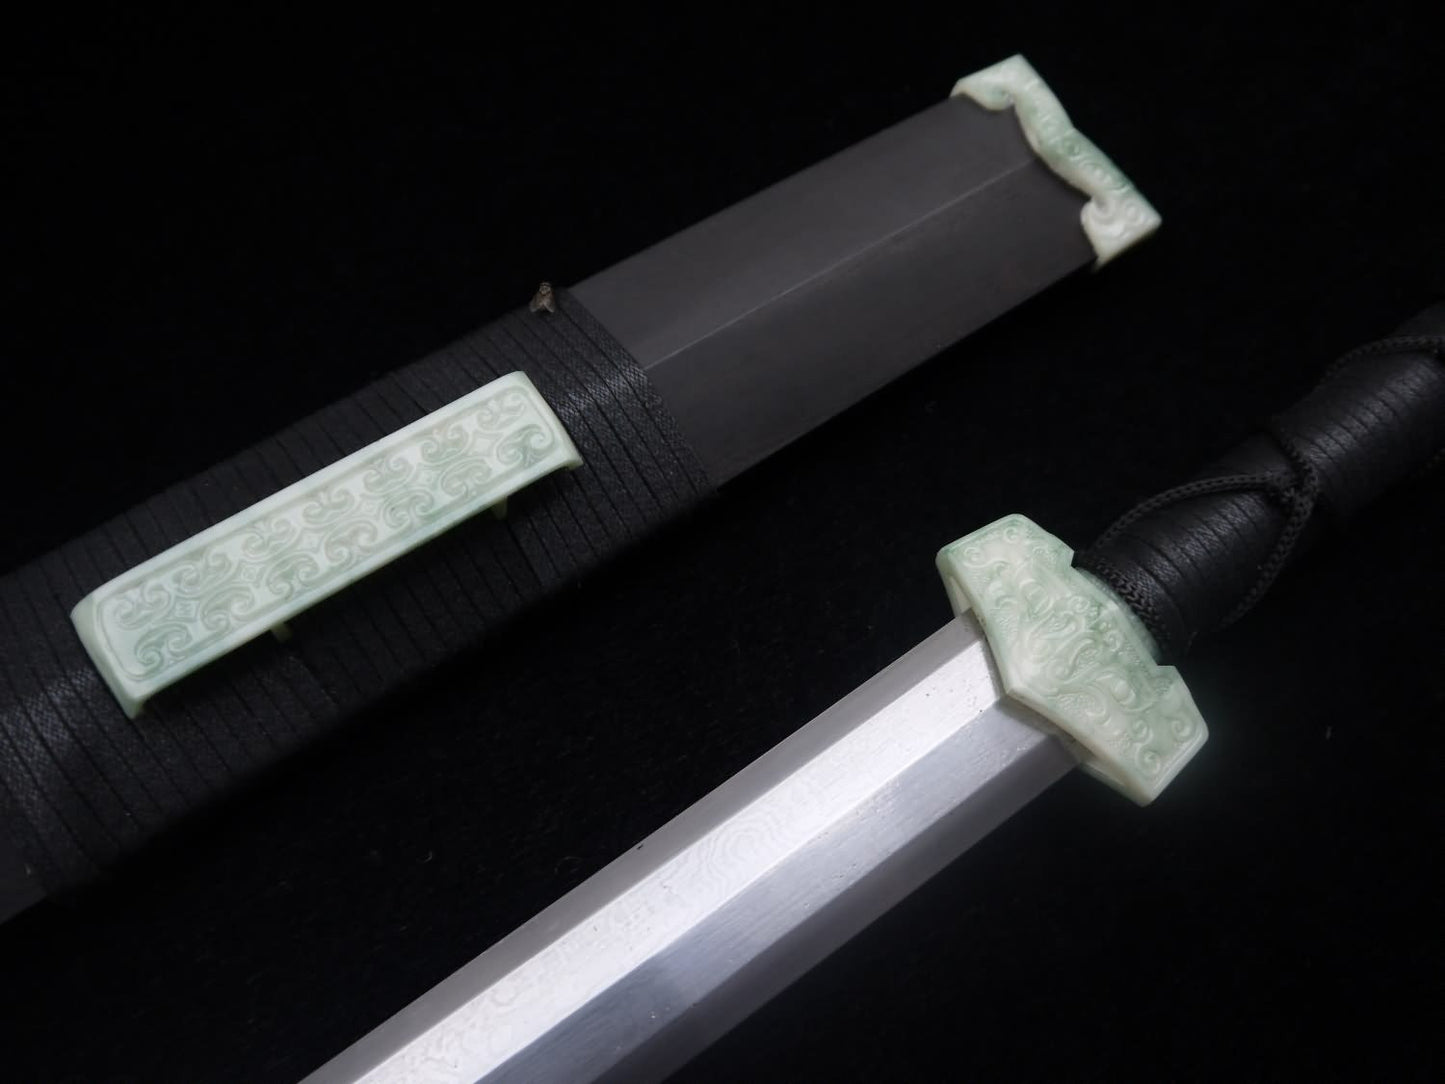 Chinese sword,Damascus steel Eight blade,Black scabbard,Resin Jade fitting - Chinese sword shop